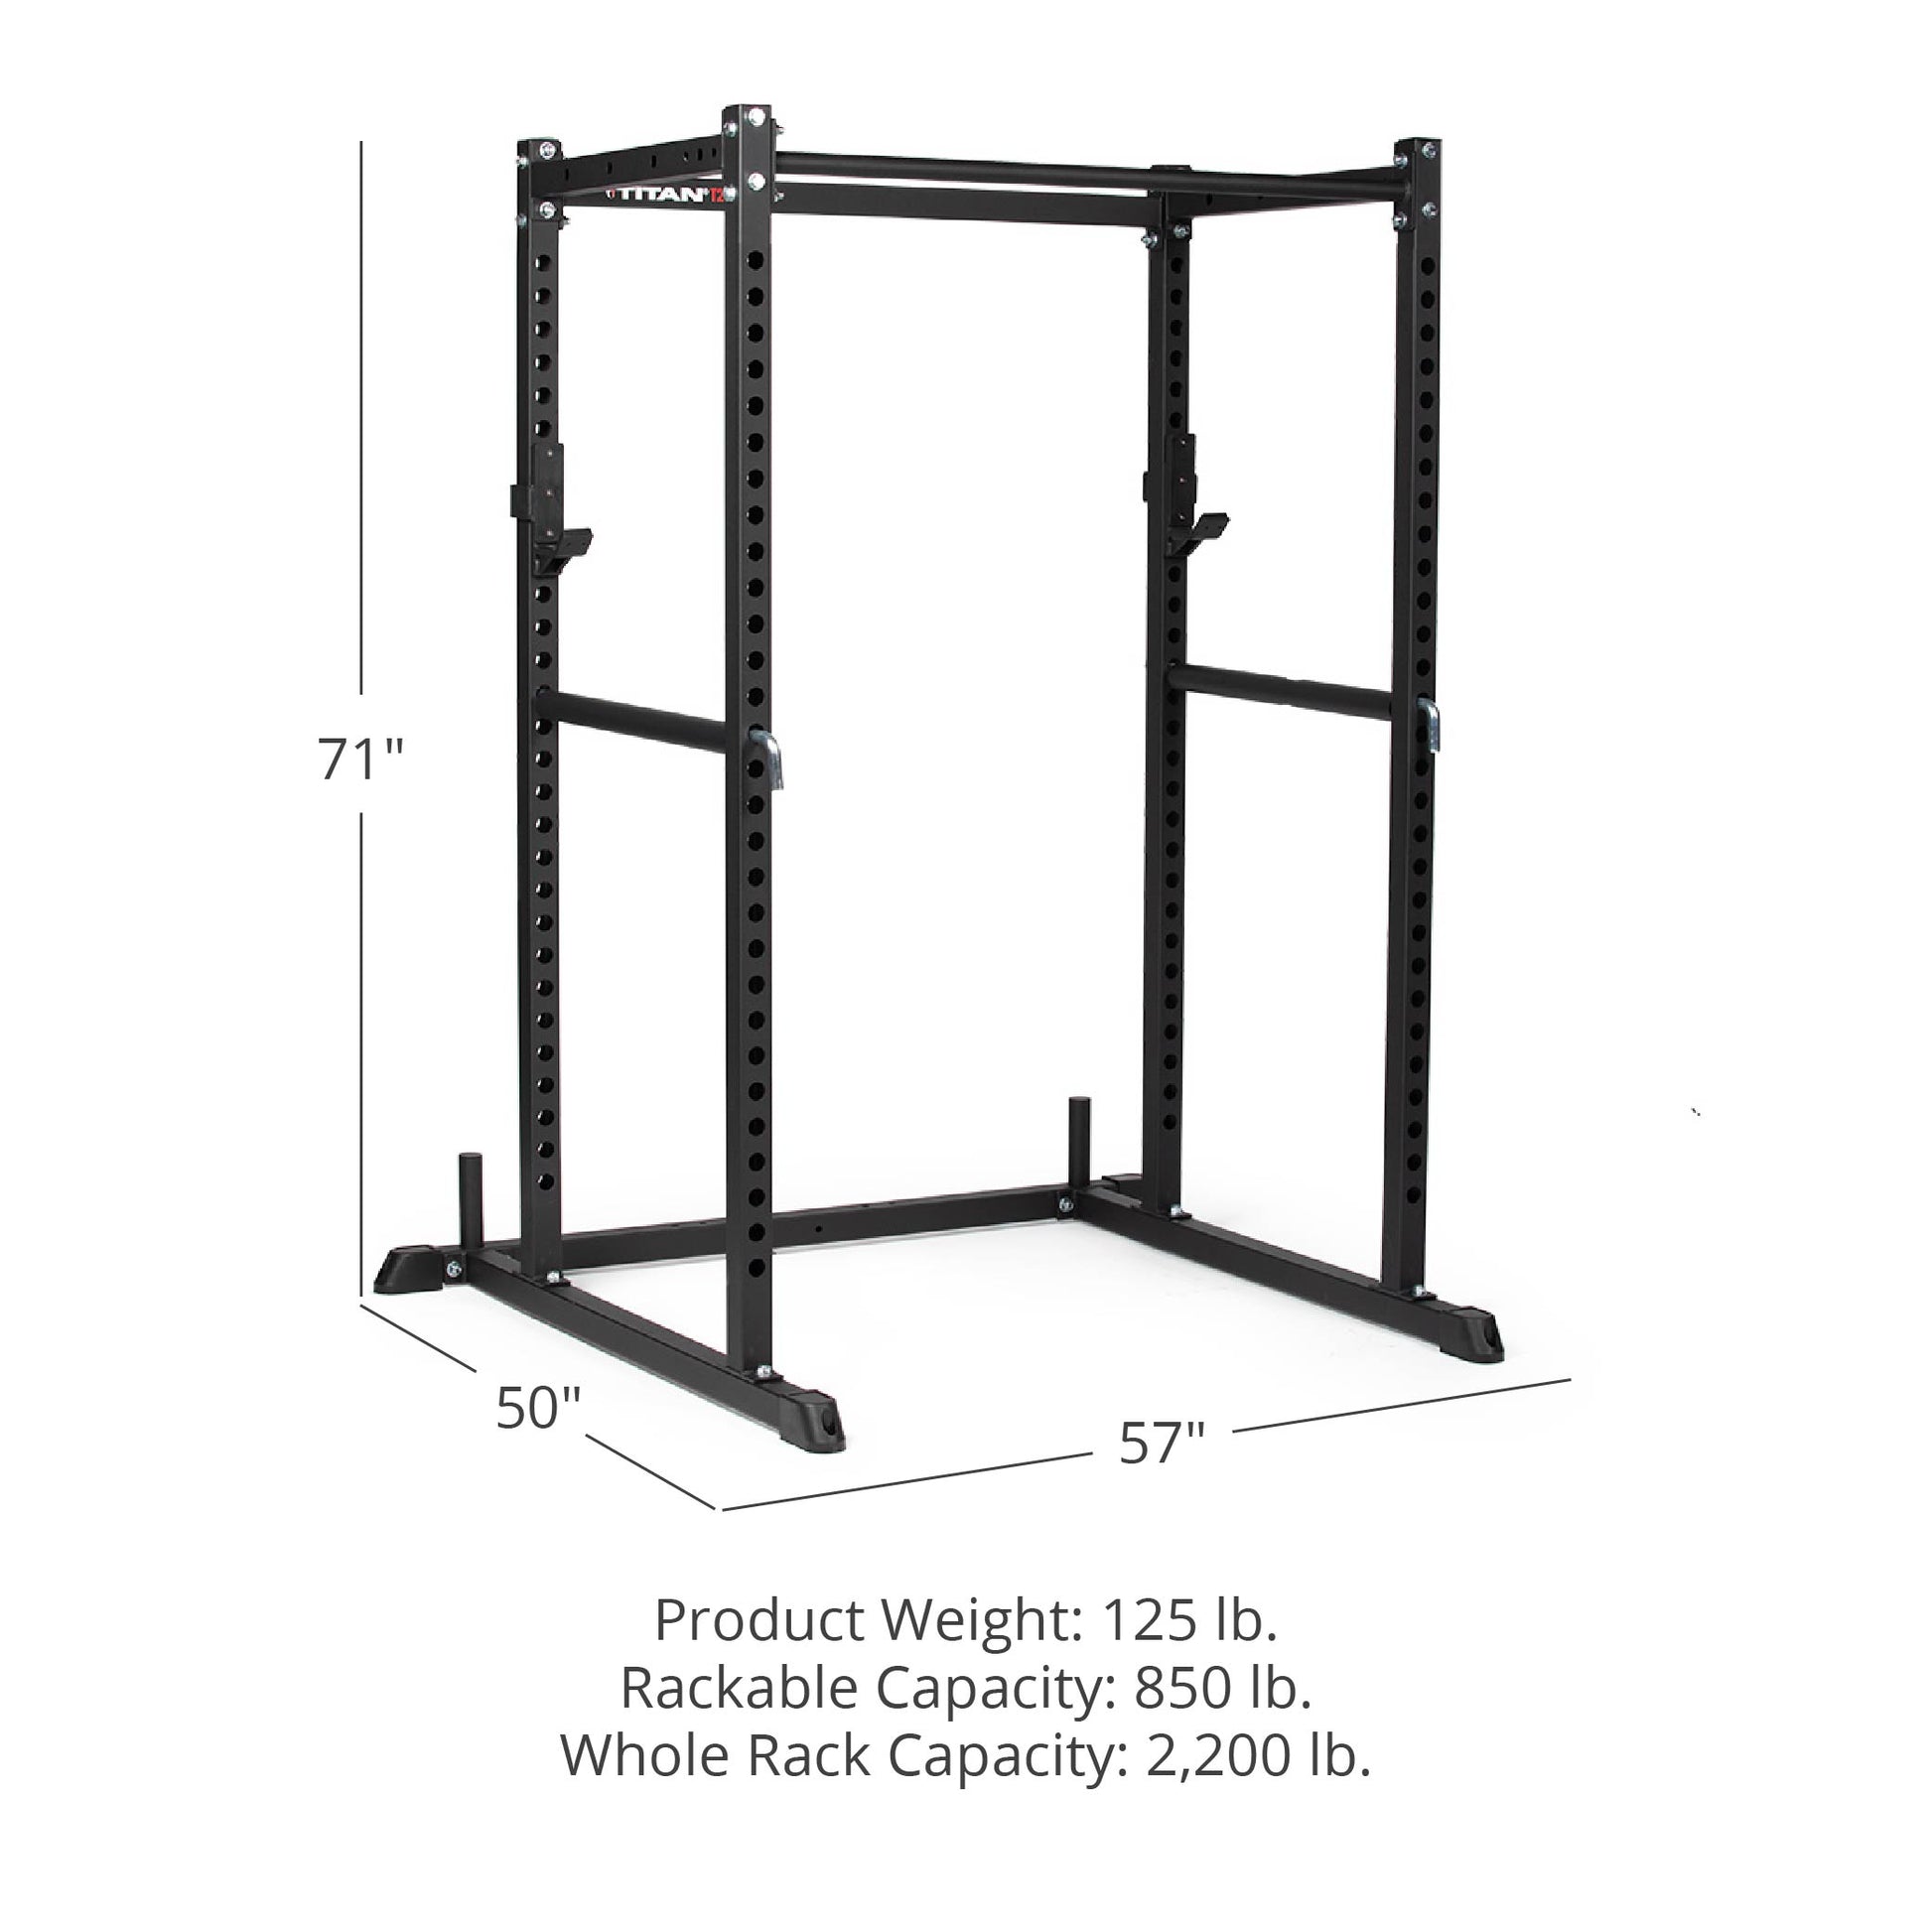 T-2 Series Power Rack | Image Shows Height of 71", Length of 50", Width of 57". Product Weight: 125 lb. Rackable Capacity: 850 lb. Whole Rack Capacity: 2,200 lb.